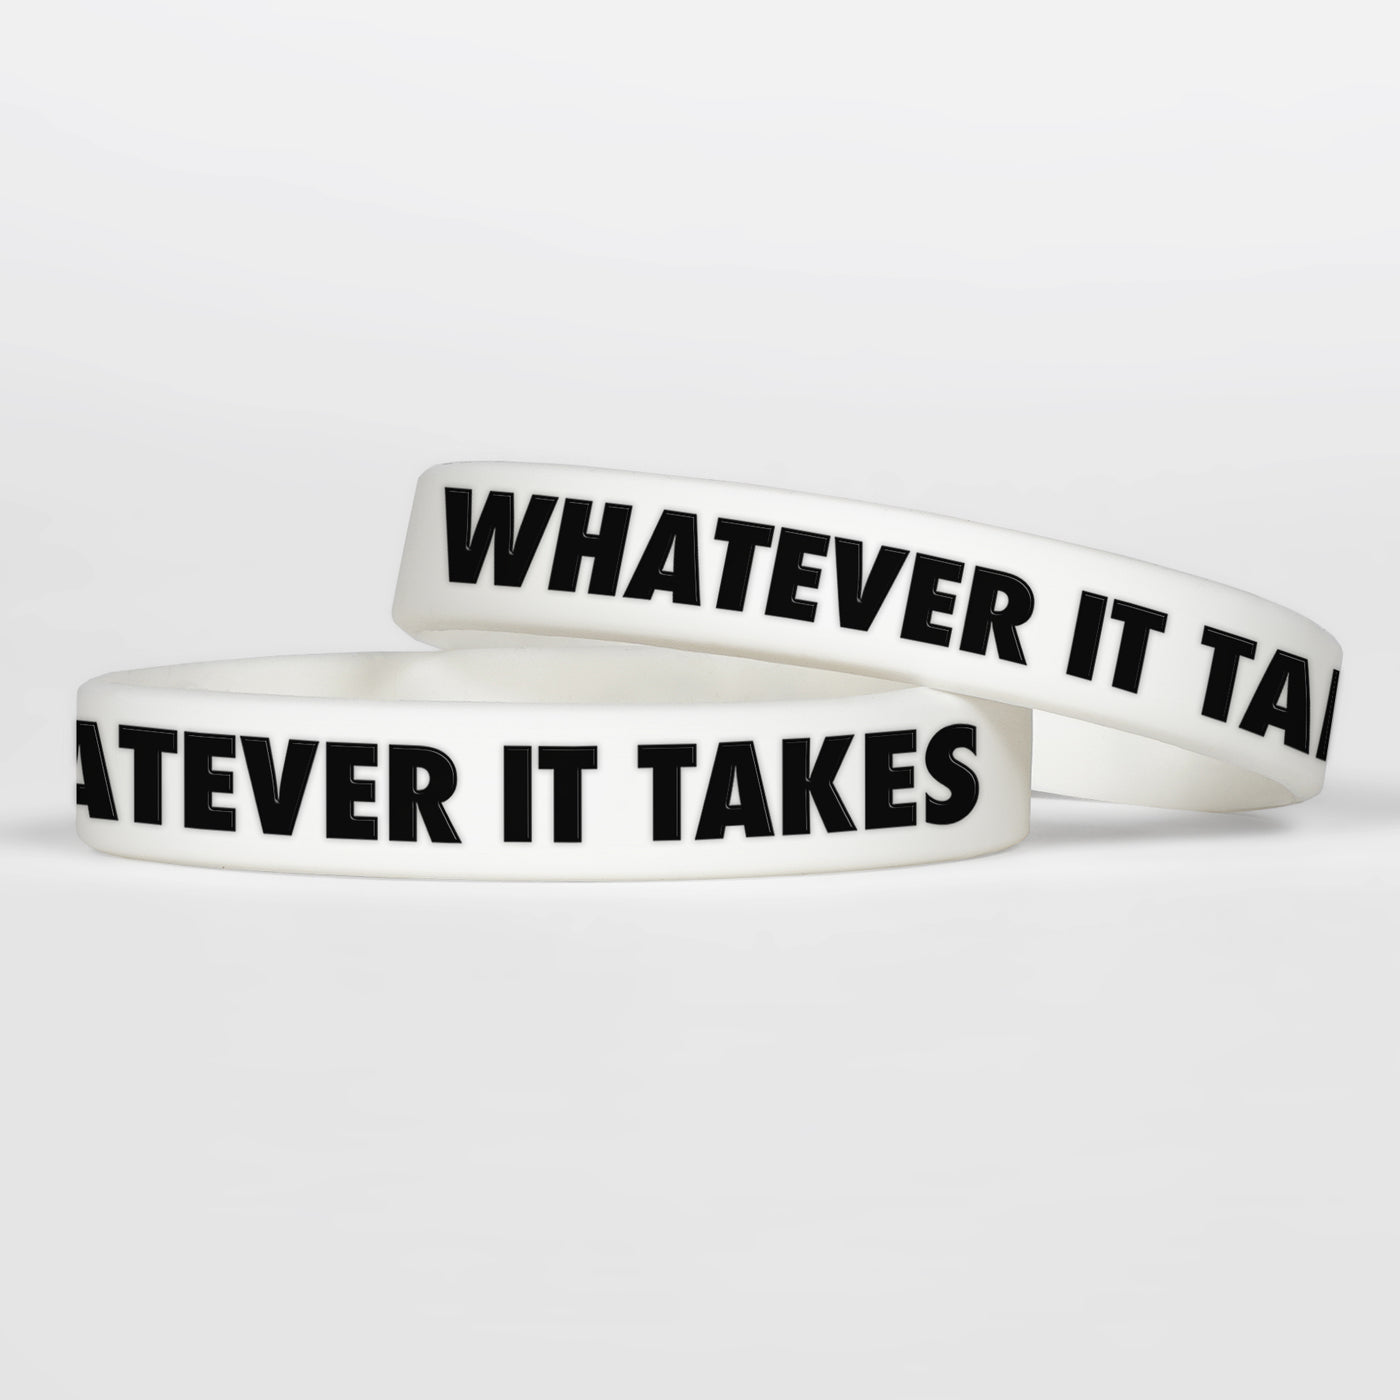 Whatever It Takes Motivational Wristband